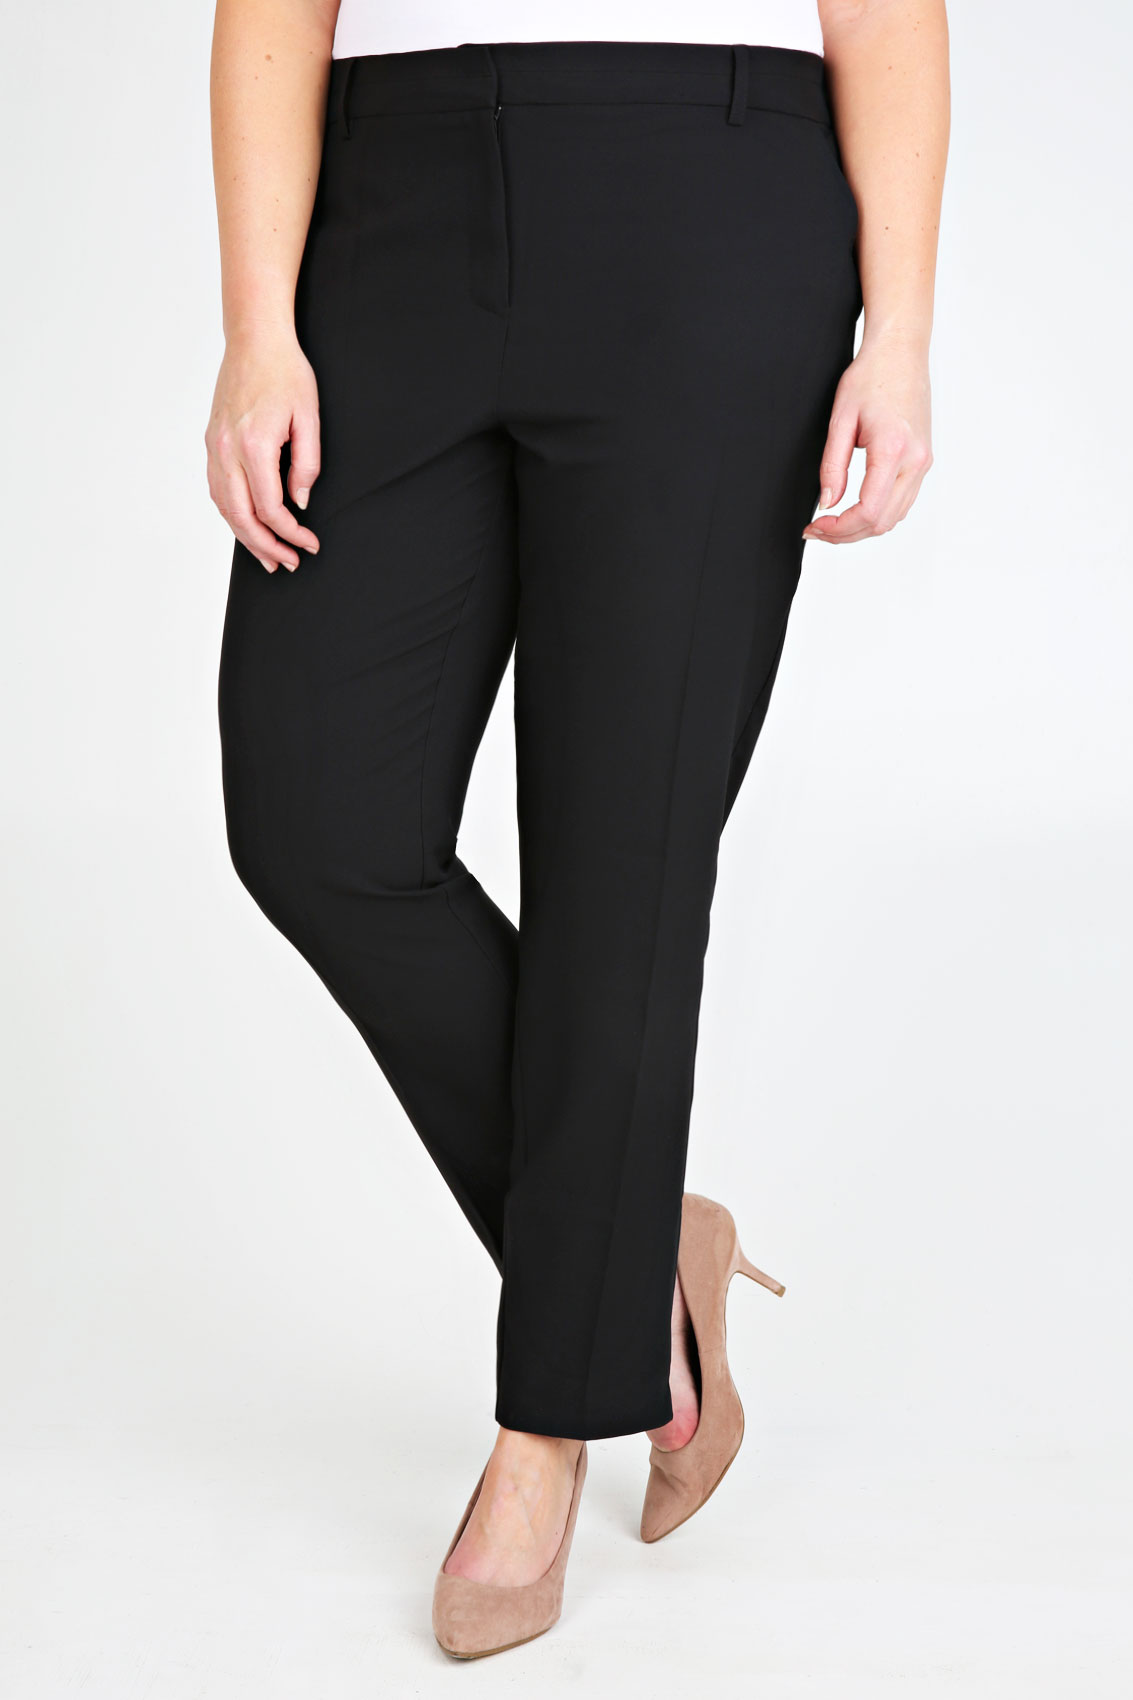 Black Slim Leg Ankle Length Trousers With Stretch Waist plus Size 16 to 28